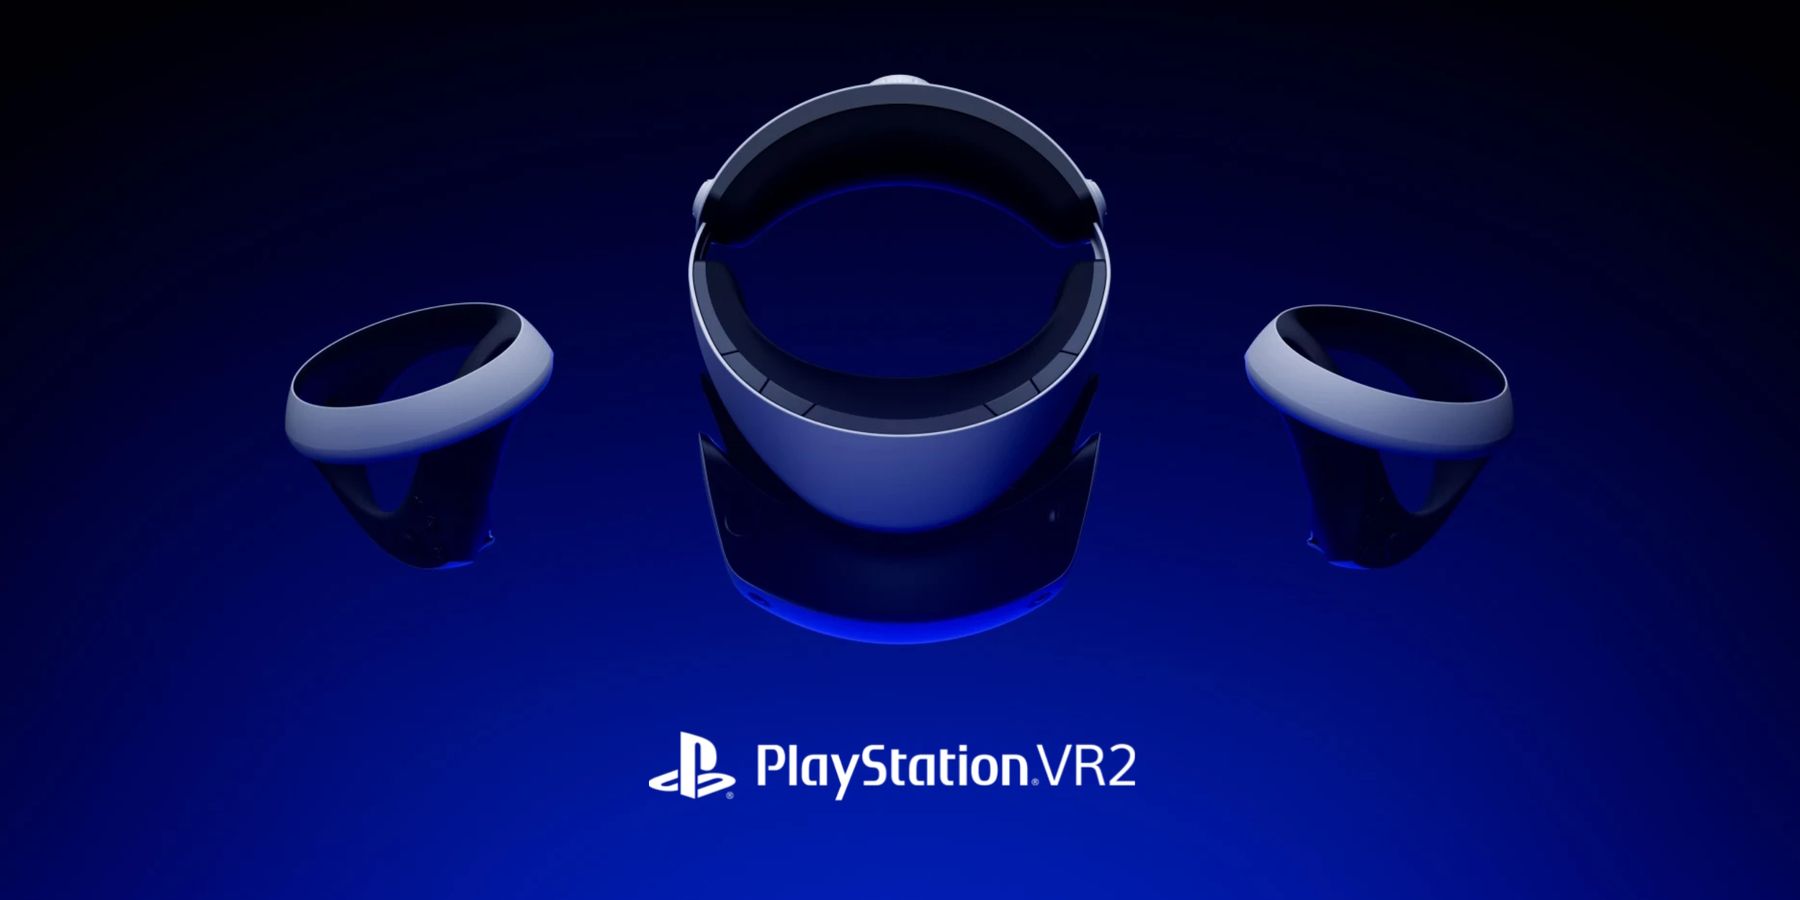 Promotional picture of the PS VR2